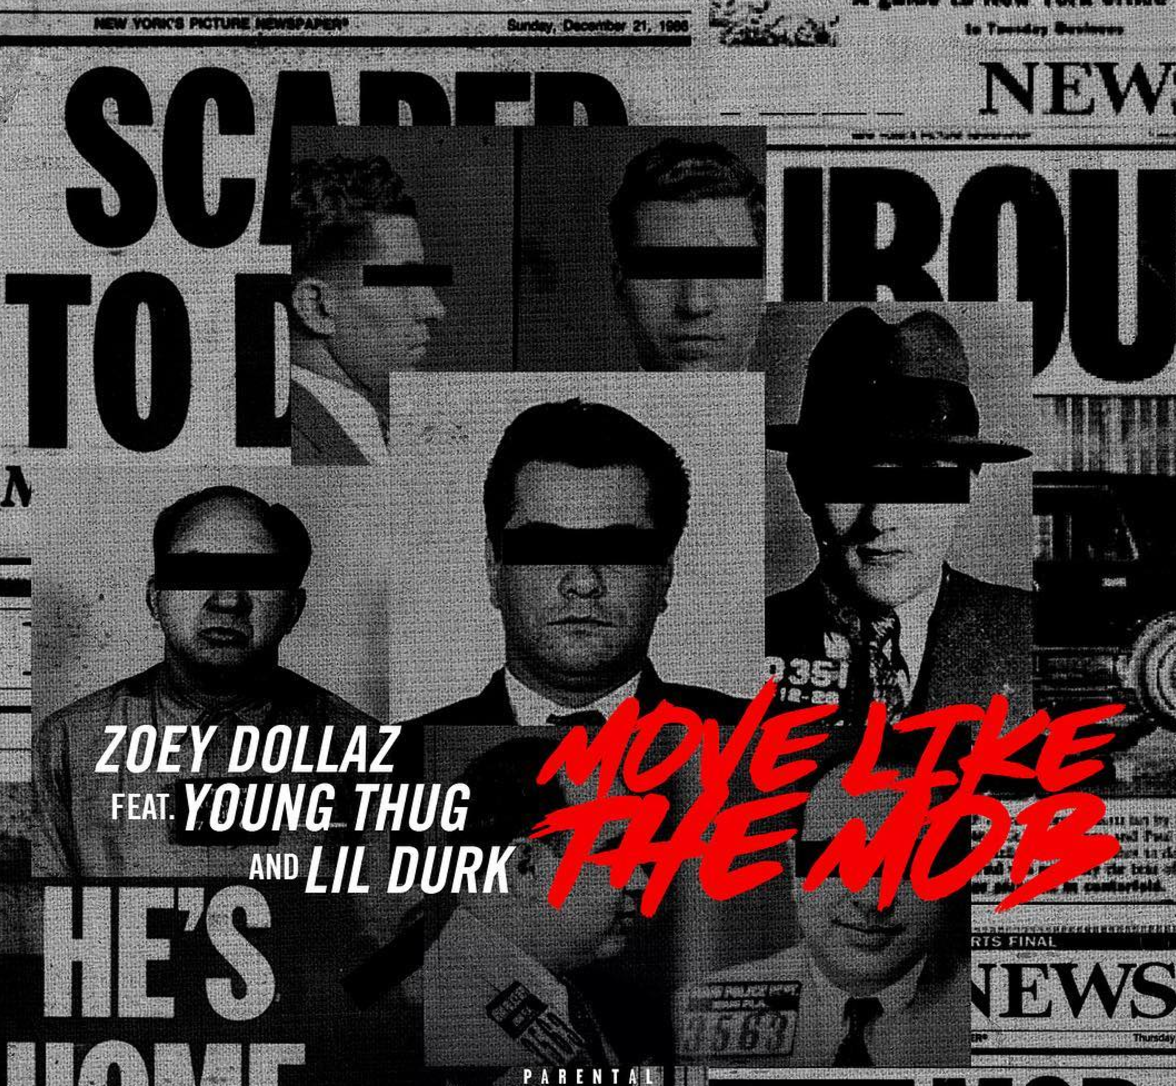 New Music: Zoey Dollaz – “Move Like The Mob” Feat. Young Thug & Lil Durk [LISTEN]